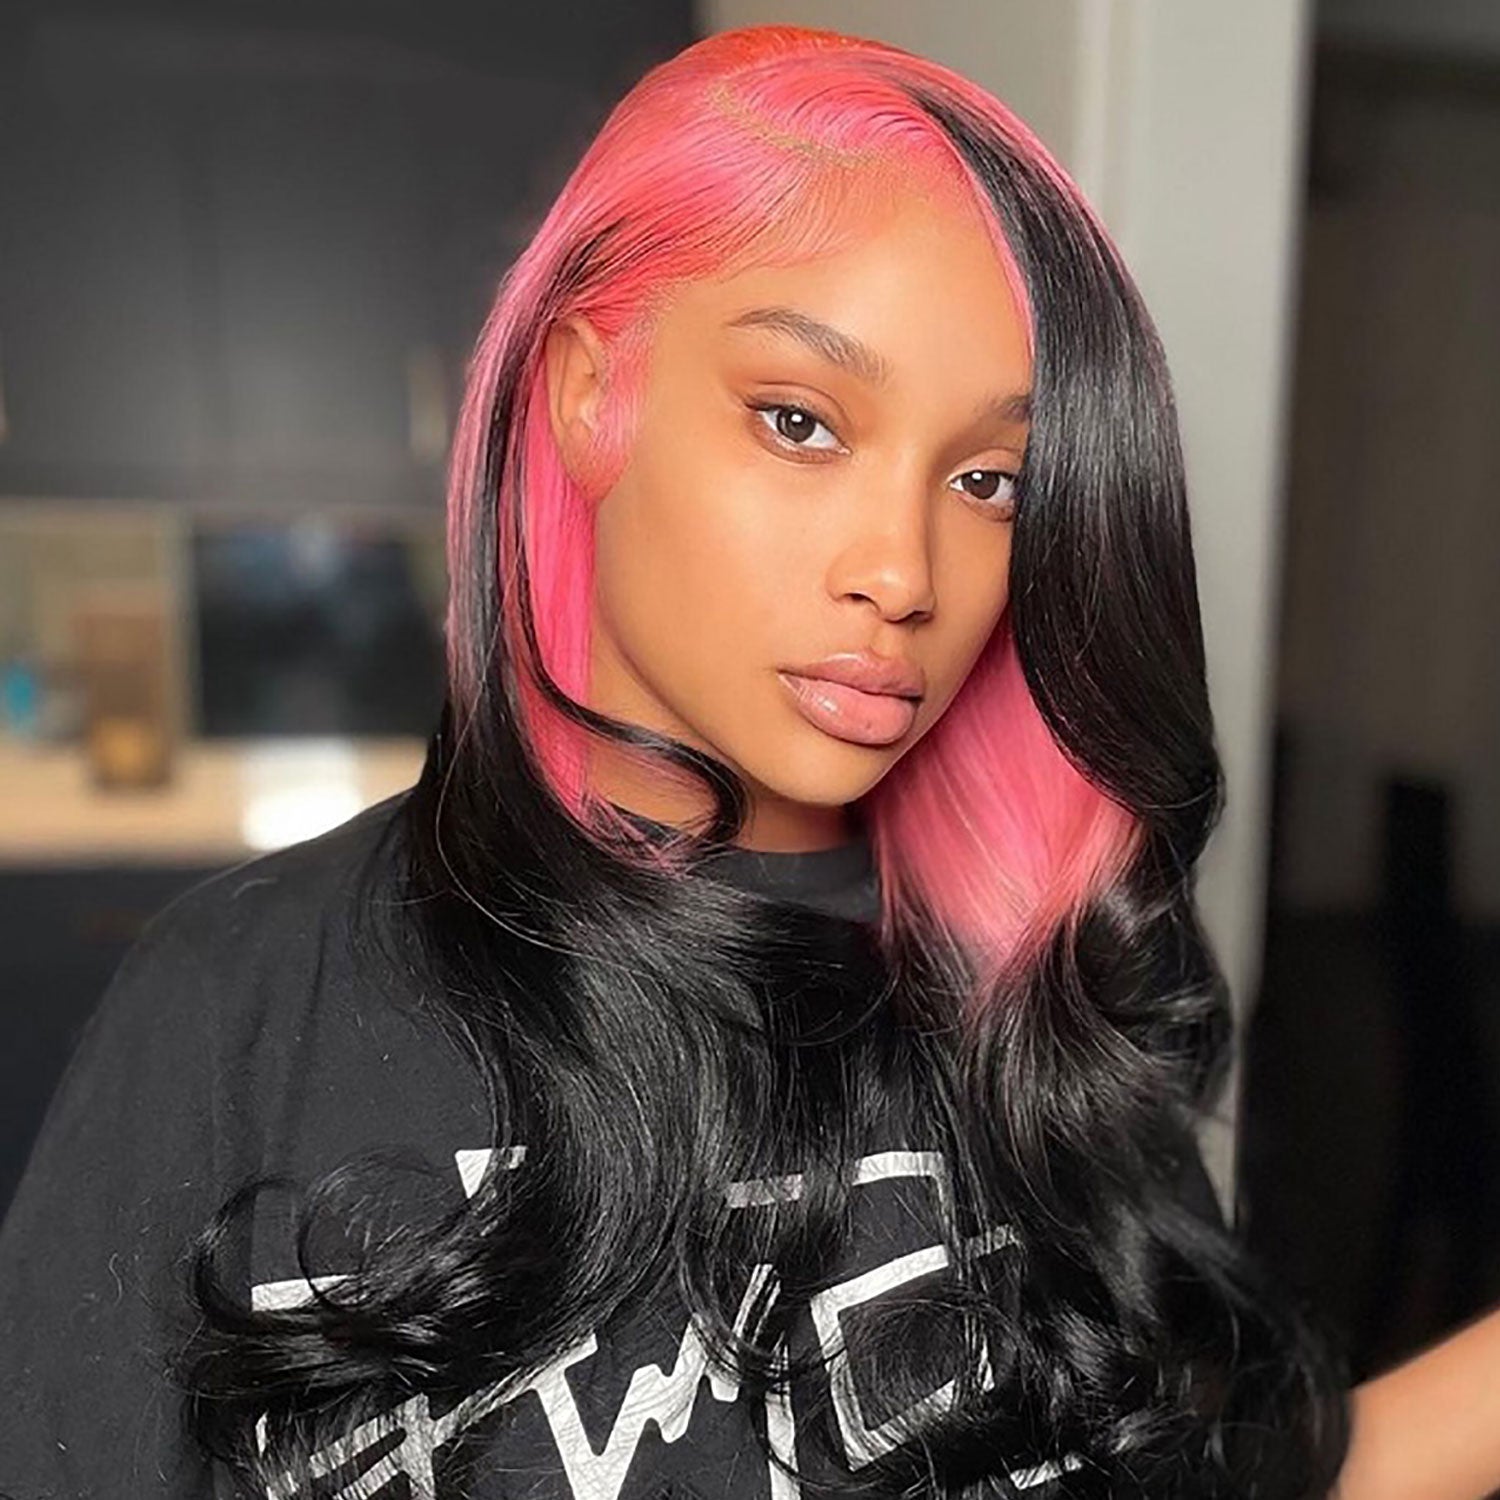 Pink highlights on the black hairunique style  Gallery posted by HairHistories   Lemon8